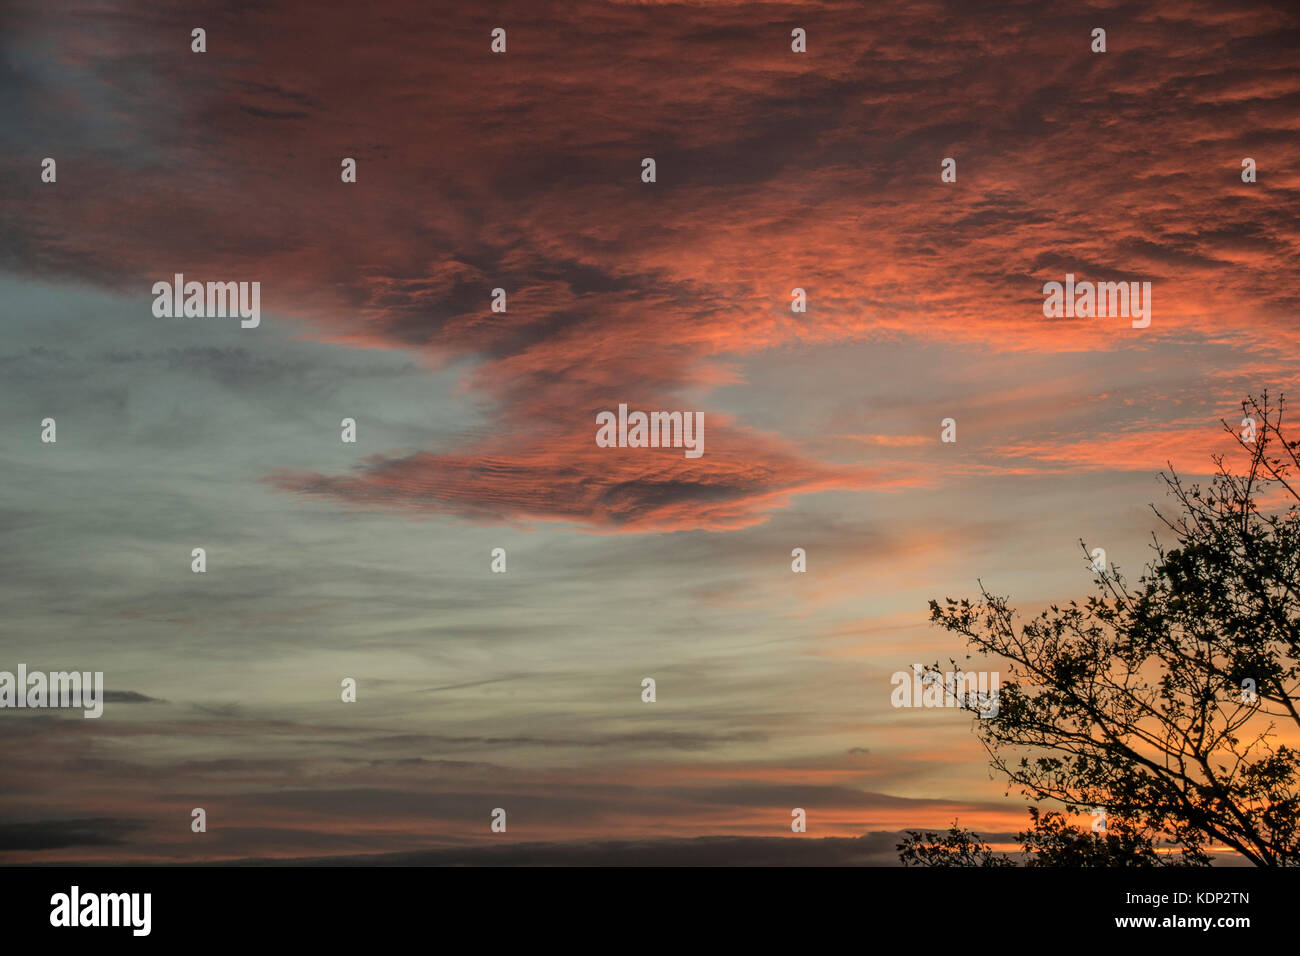 Image of the Red Sky that i took in Mansfield U.K. with a nice blueish sky background looking ready for a storm, The cloud looks like a lenticular one. Stock Photo